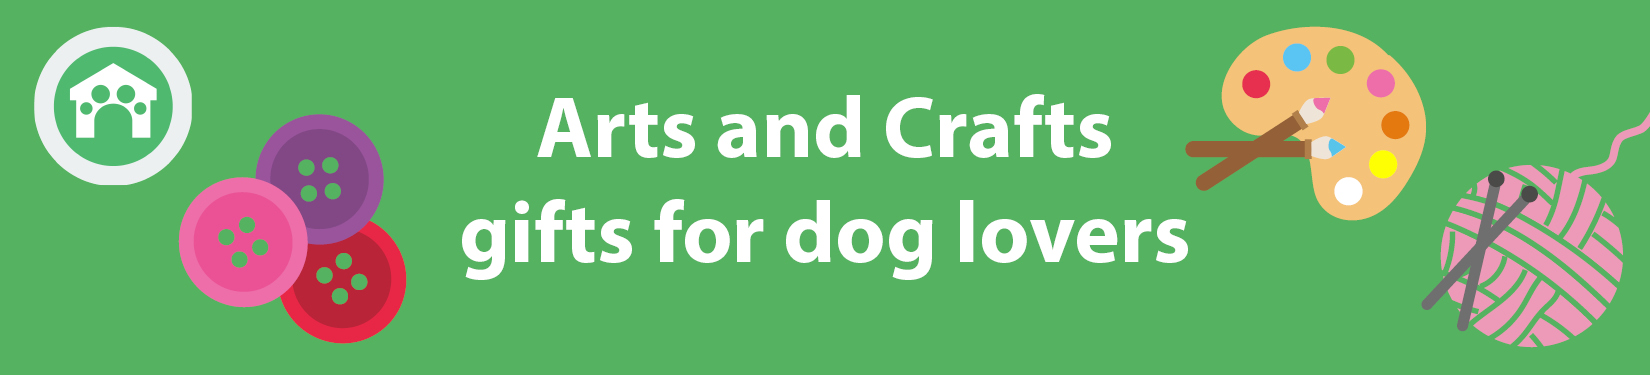 Arts and Crafts gifts for dog lovers header image